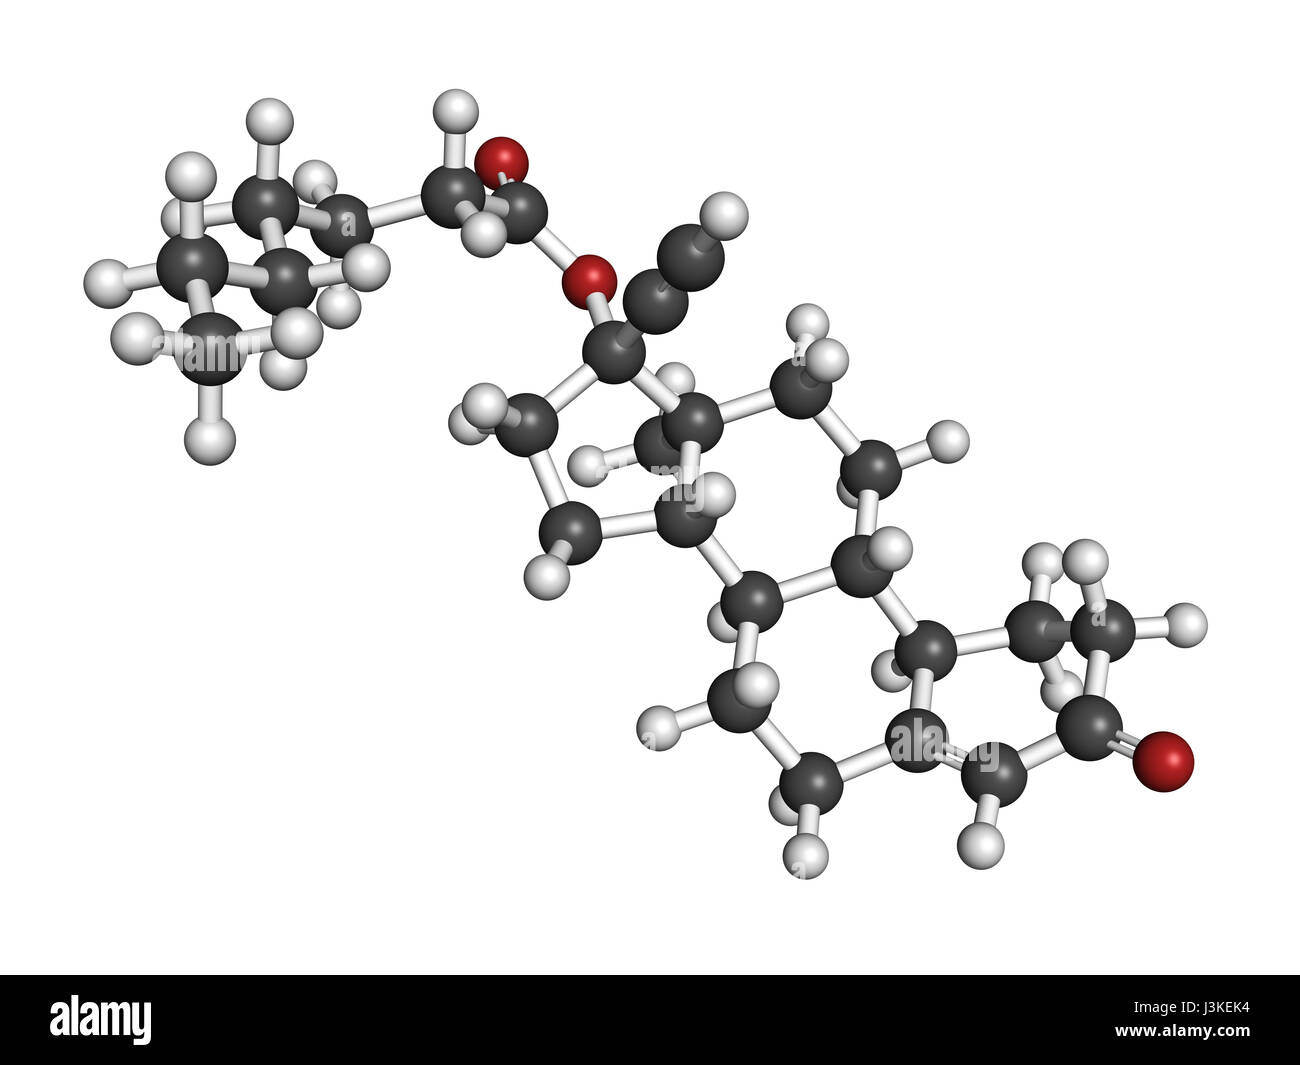 Norethisterone enanthate (norethindrone aenanthate) injectable contraceptive drug molecule. Atoms are represented as spheres with conventional color c Stock Photo